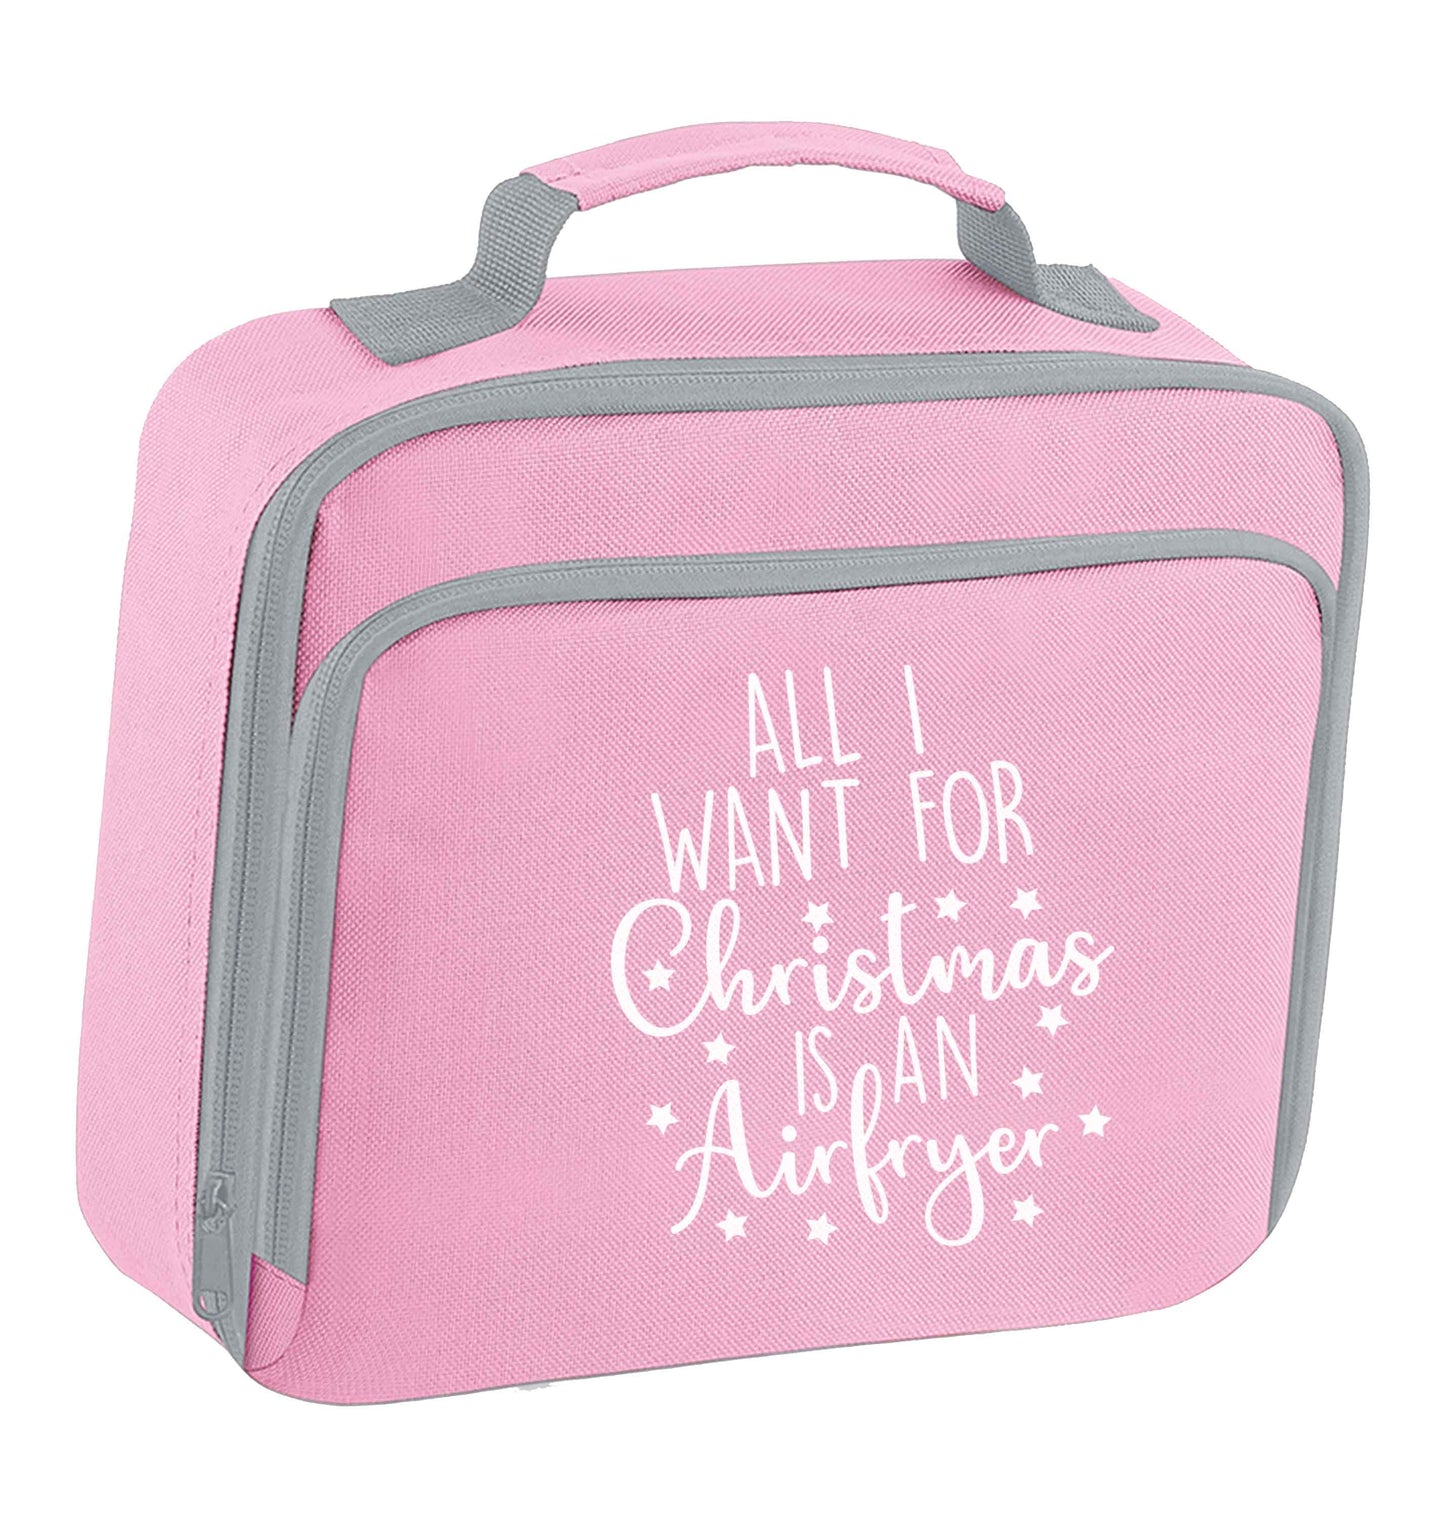 All I want for Christmas is an airfryerinsulated pink lunch bag cooler